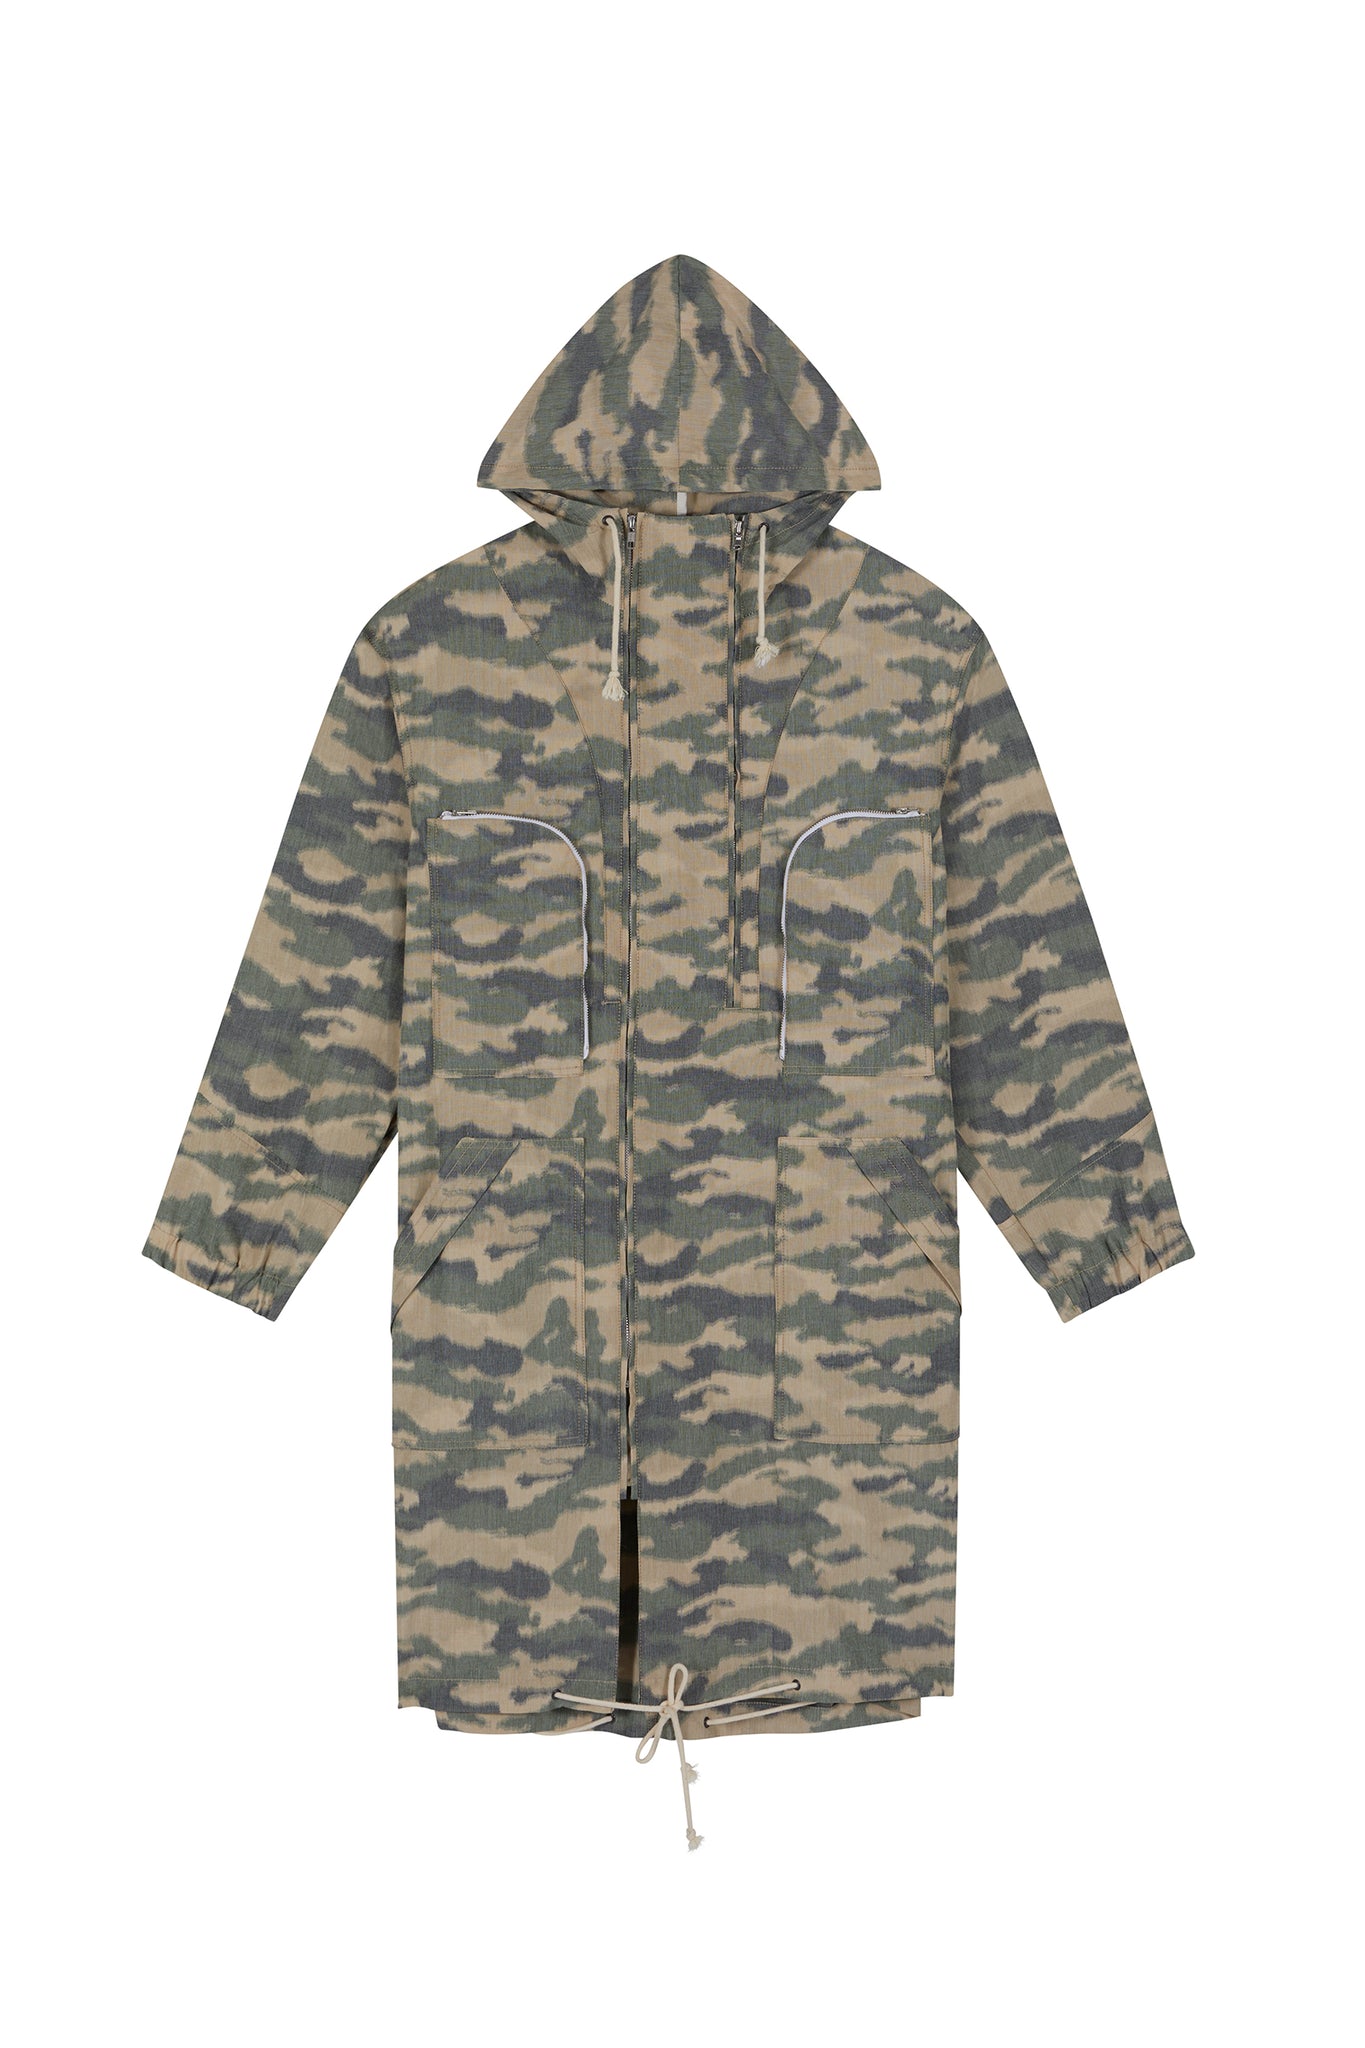 THE MOUNTAIN PARKA IN CAMOUFLAGE COTTON